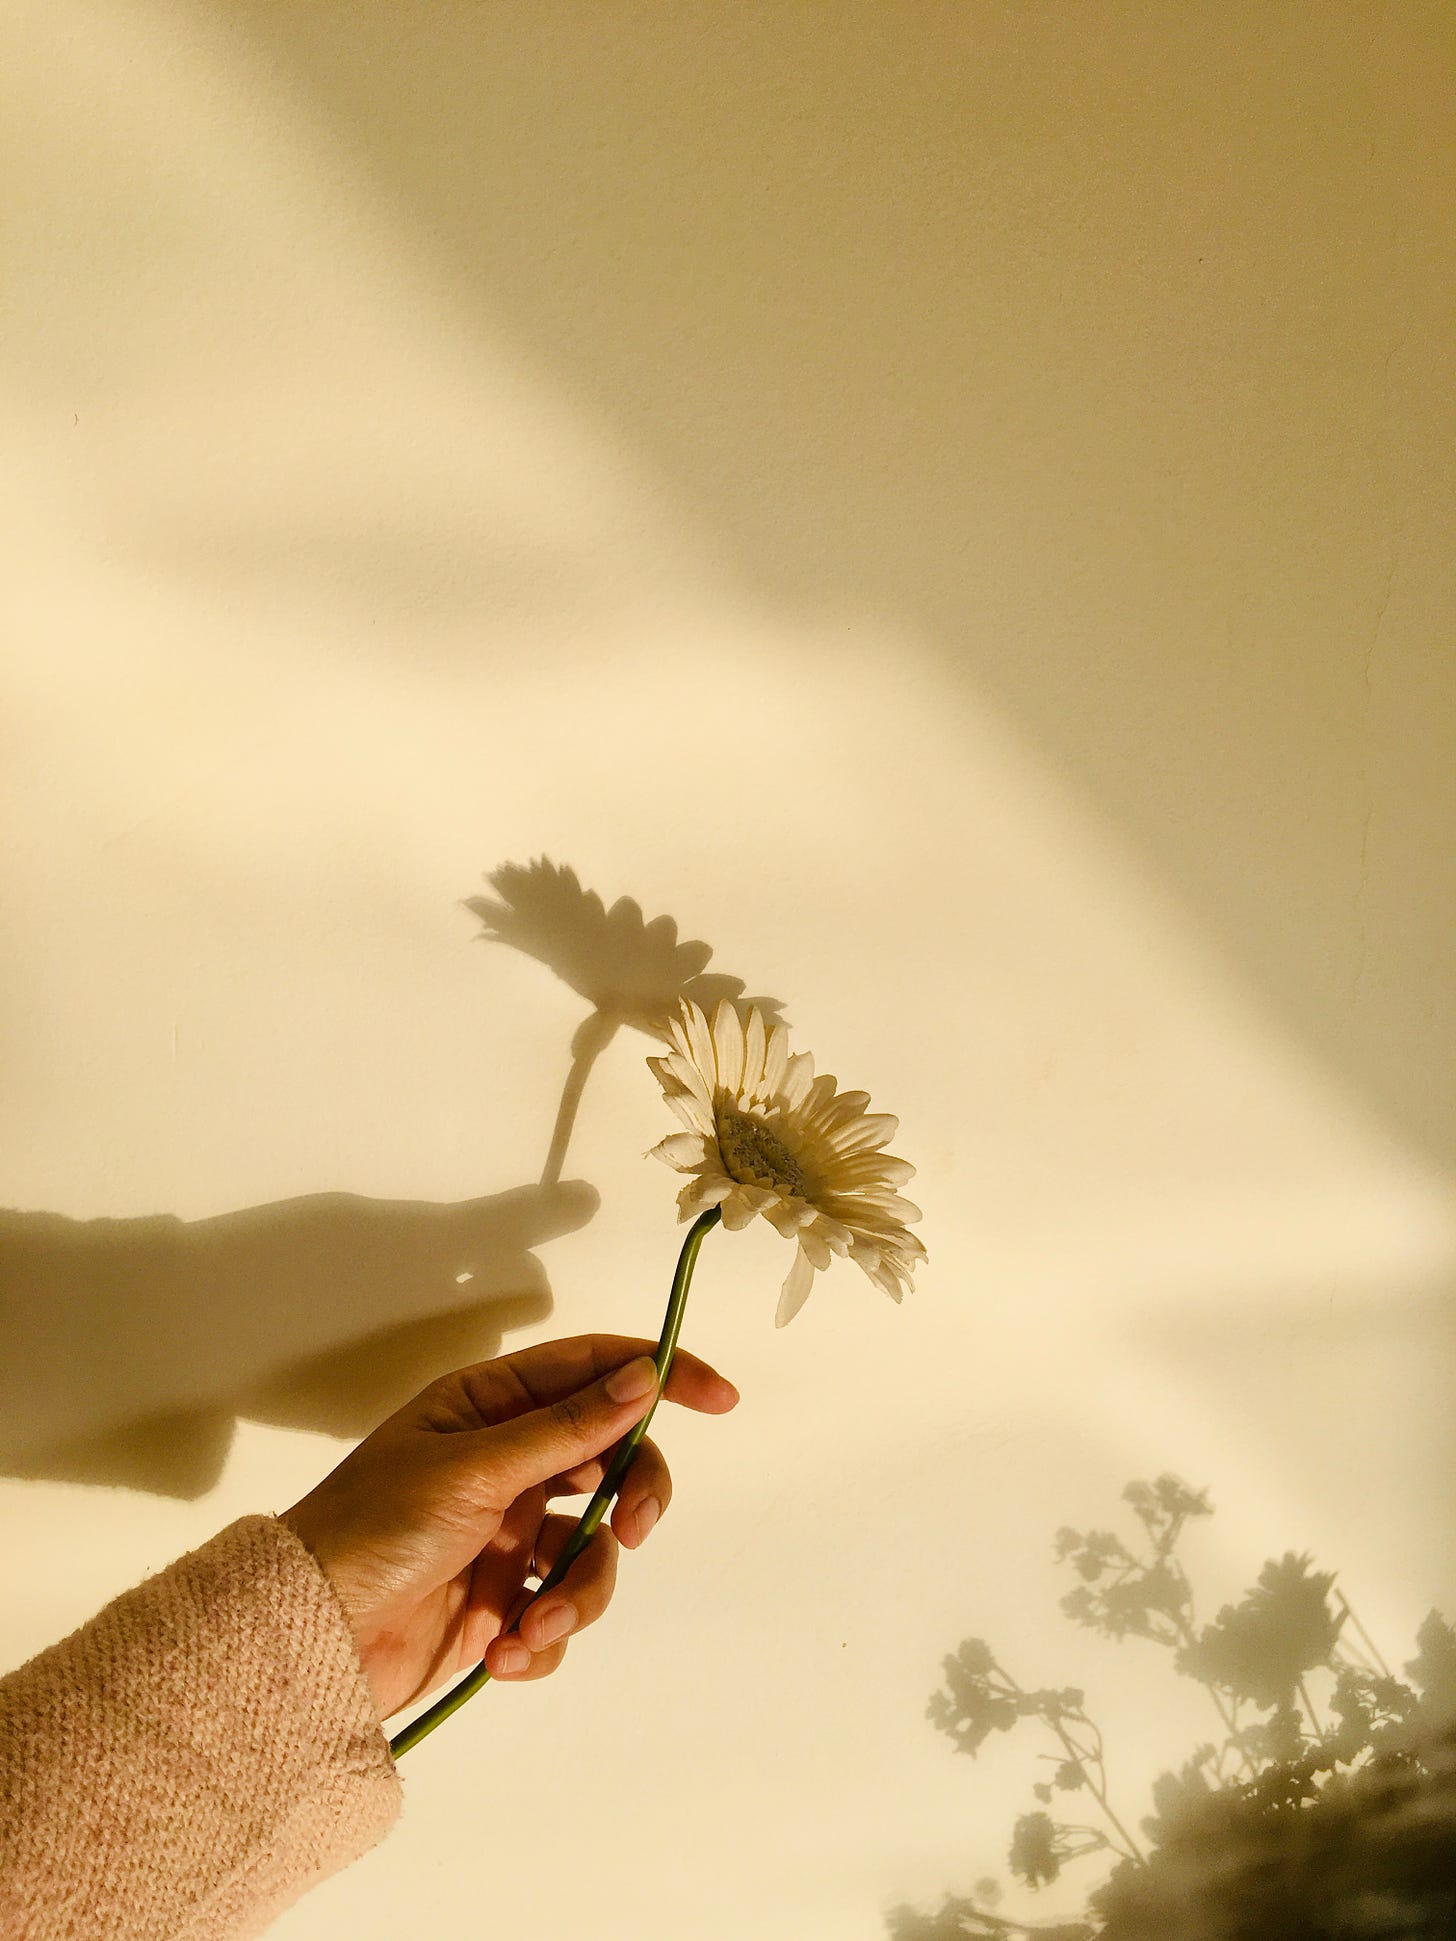 I delicate hand of a girl holding a white flower in the bright sunlight against the wall. The shadow of the flower and her hand falls on the wall making a contrast of light and dark.